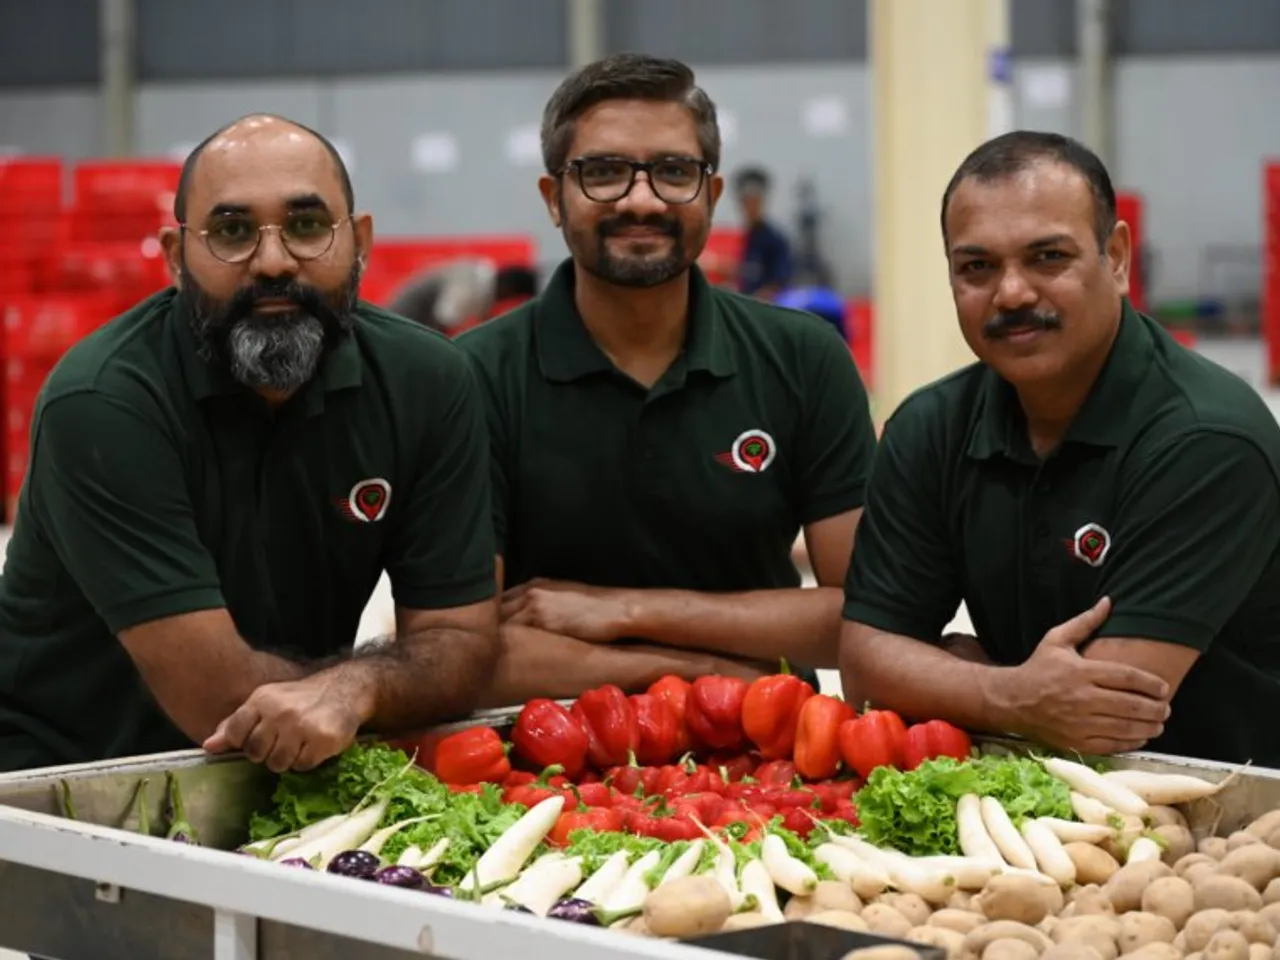 F&V supply chain startup Wheelocity raises $12M in funding led by Lightspeed, others